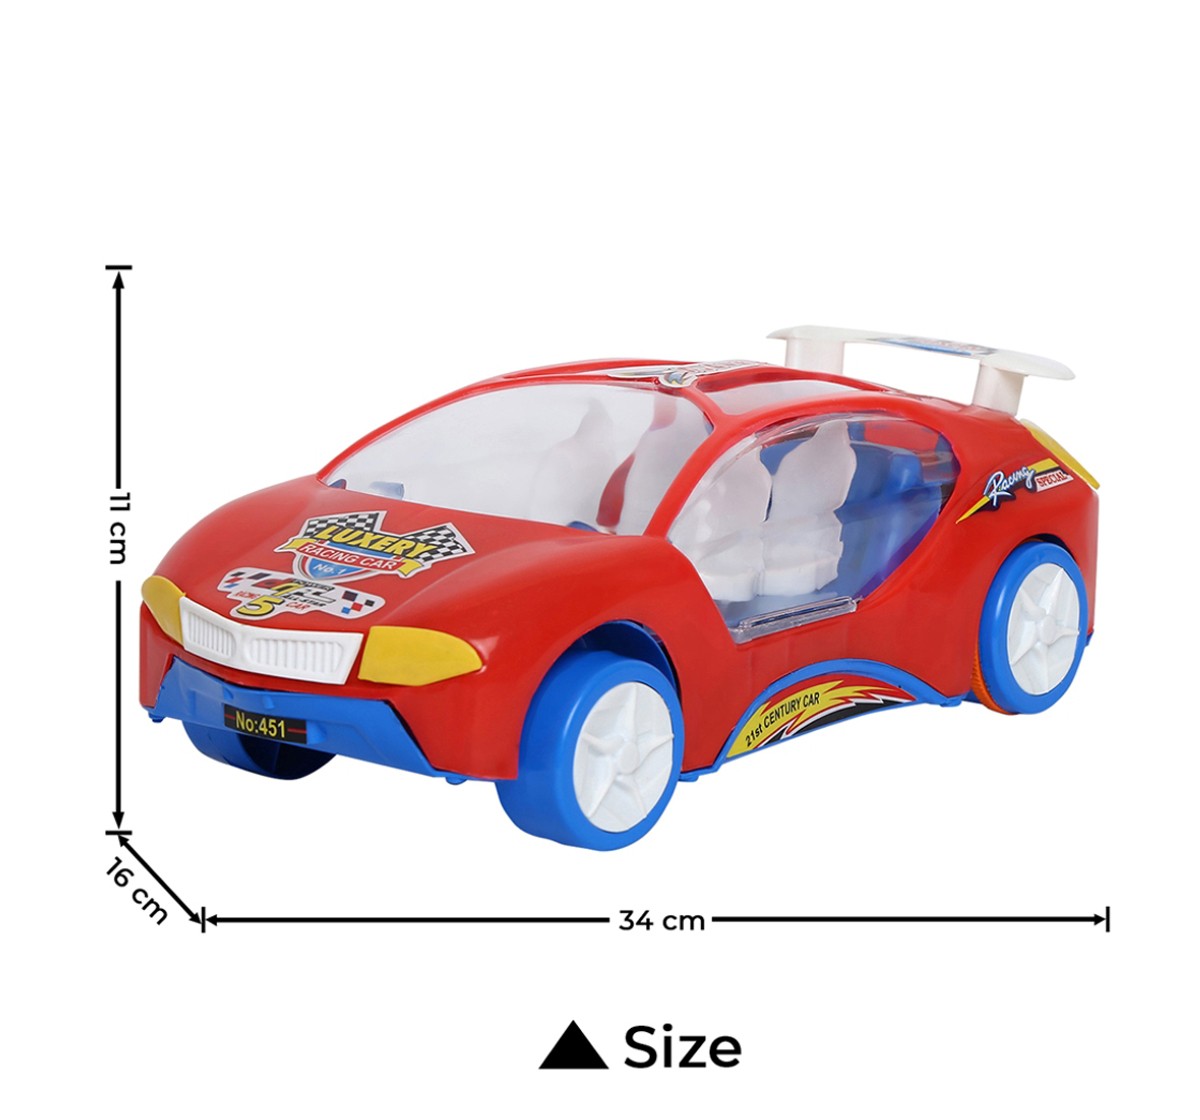 Toyspree Friction Powered Luxery Car for Kids, 18M+ (Multicolor)